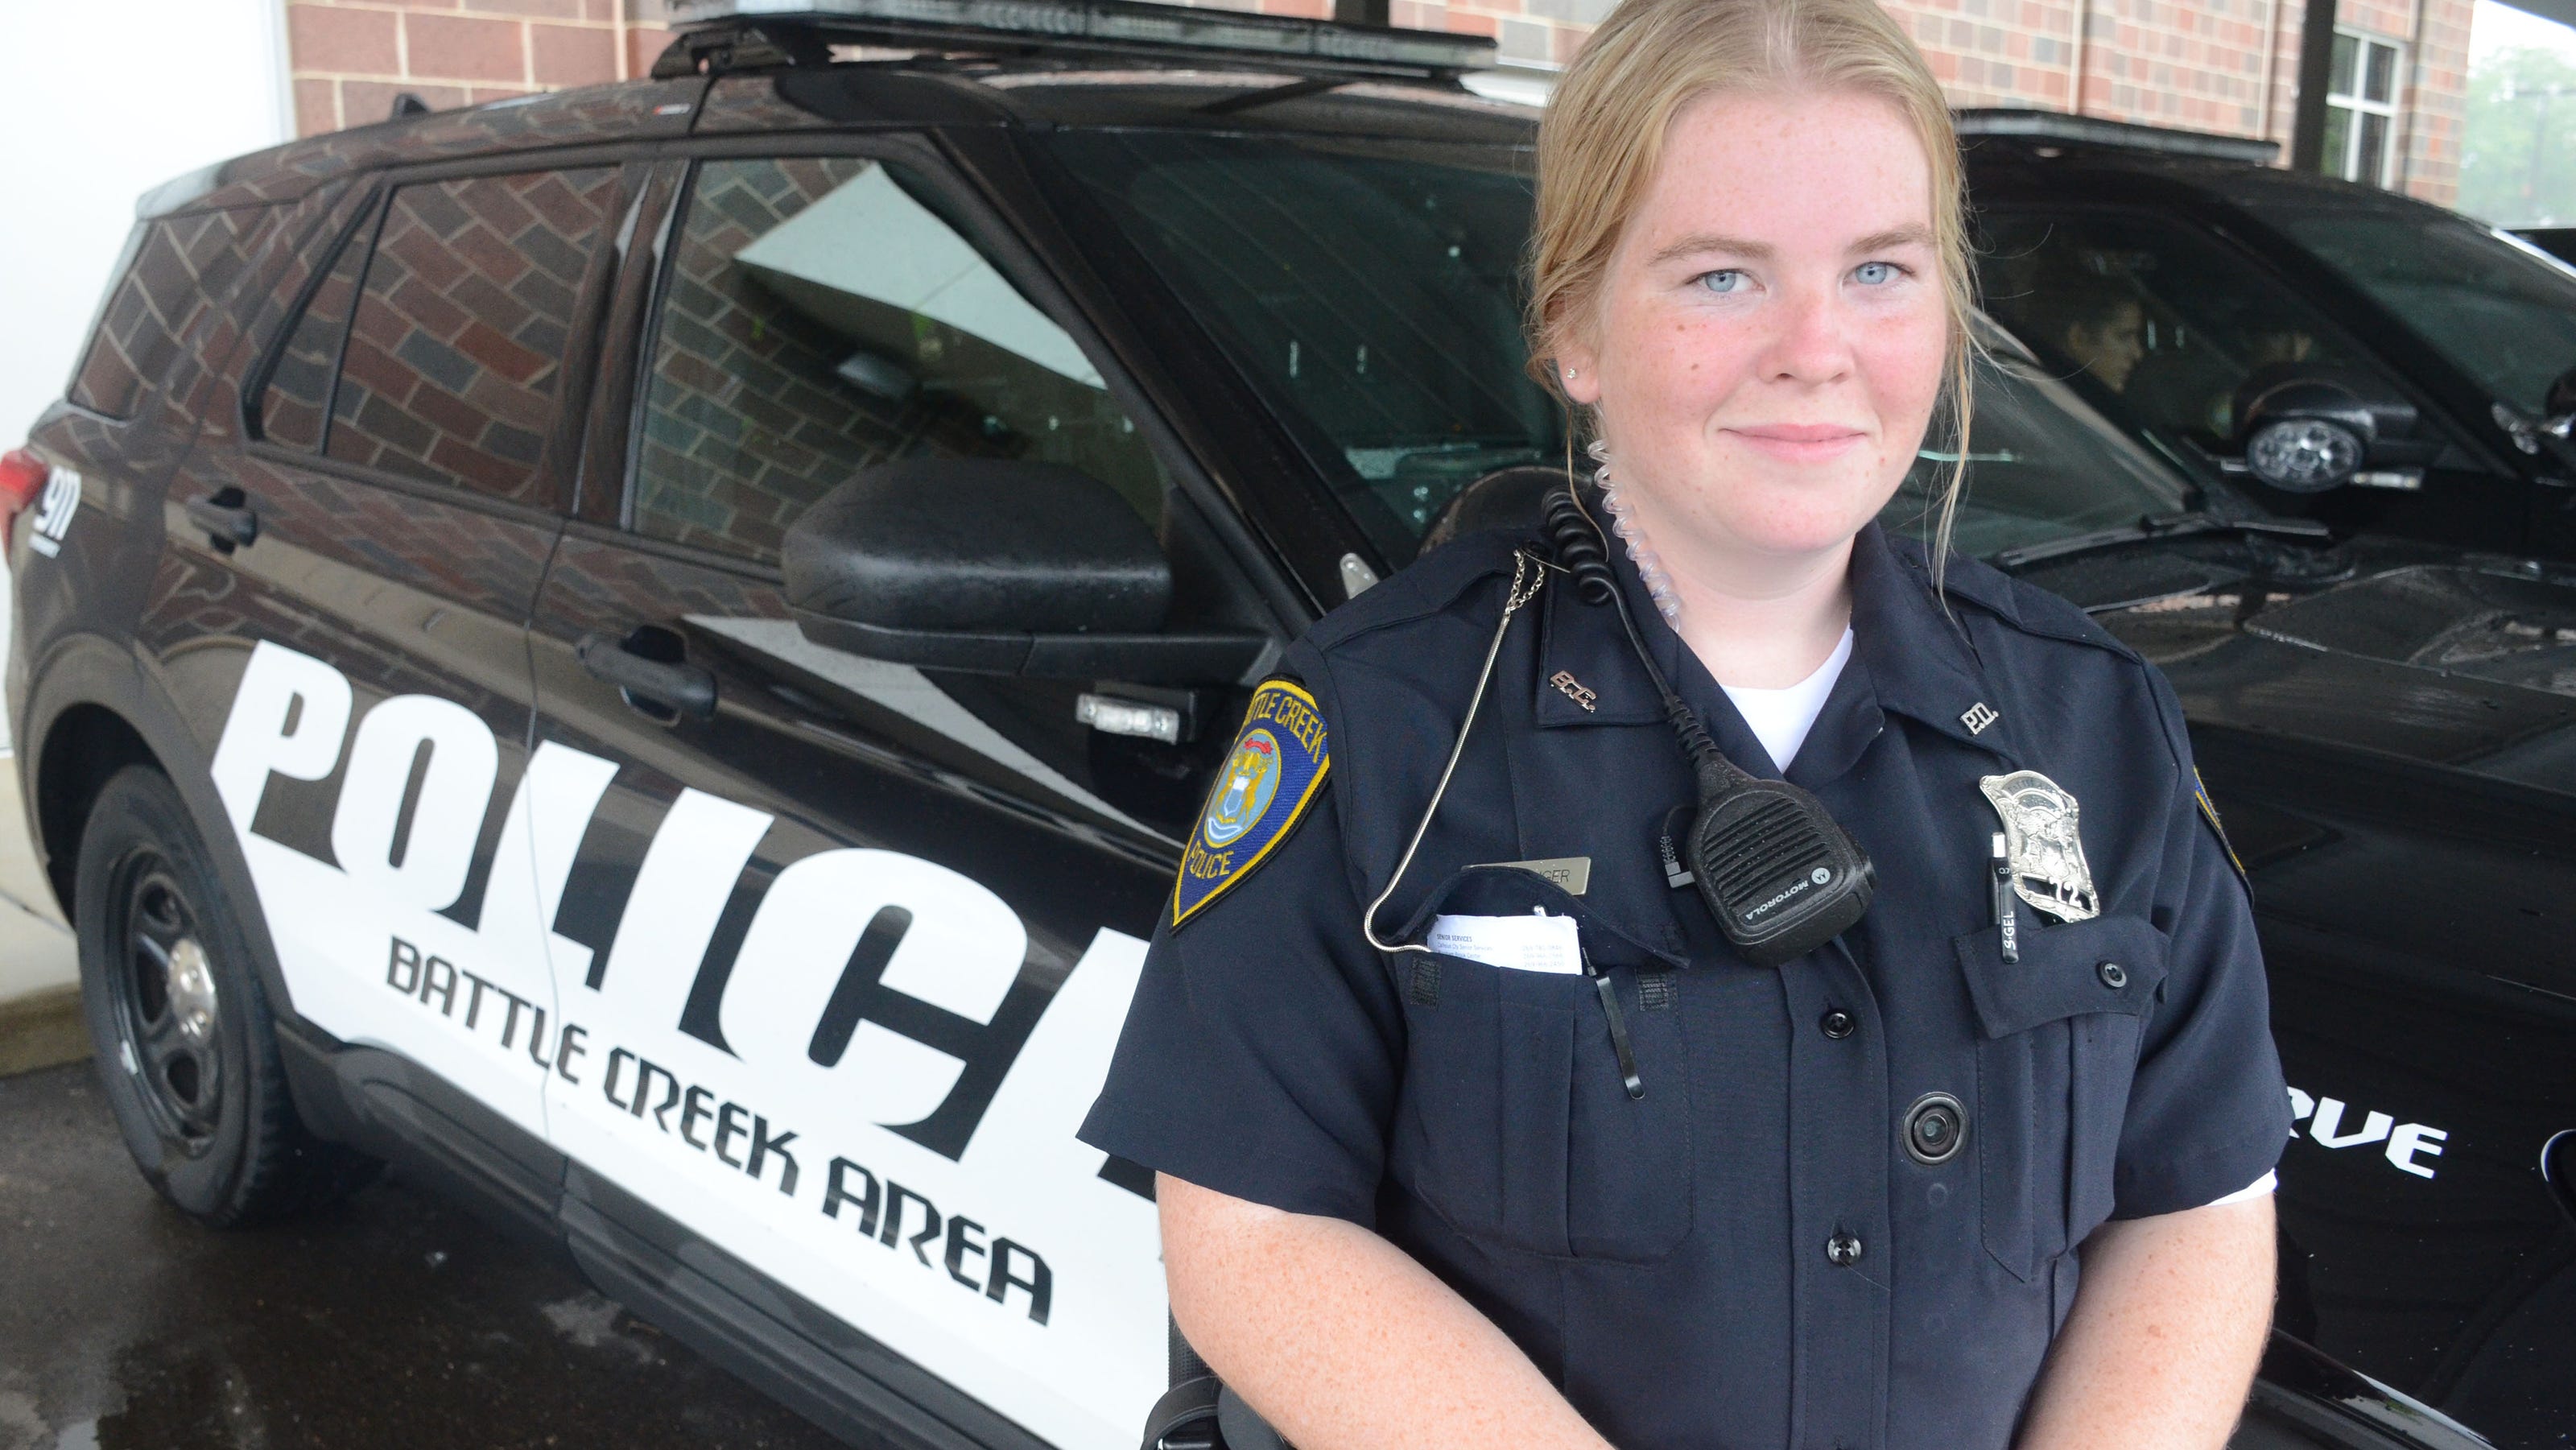 As communities need more police officers, KCC sees fewer students